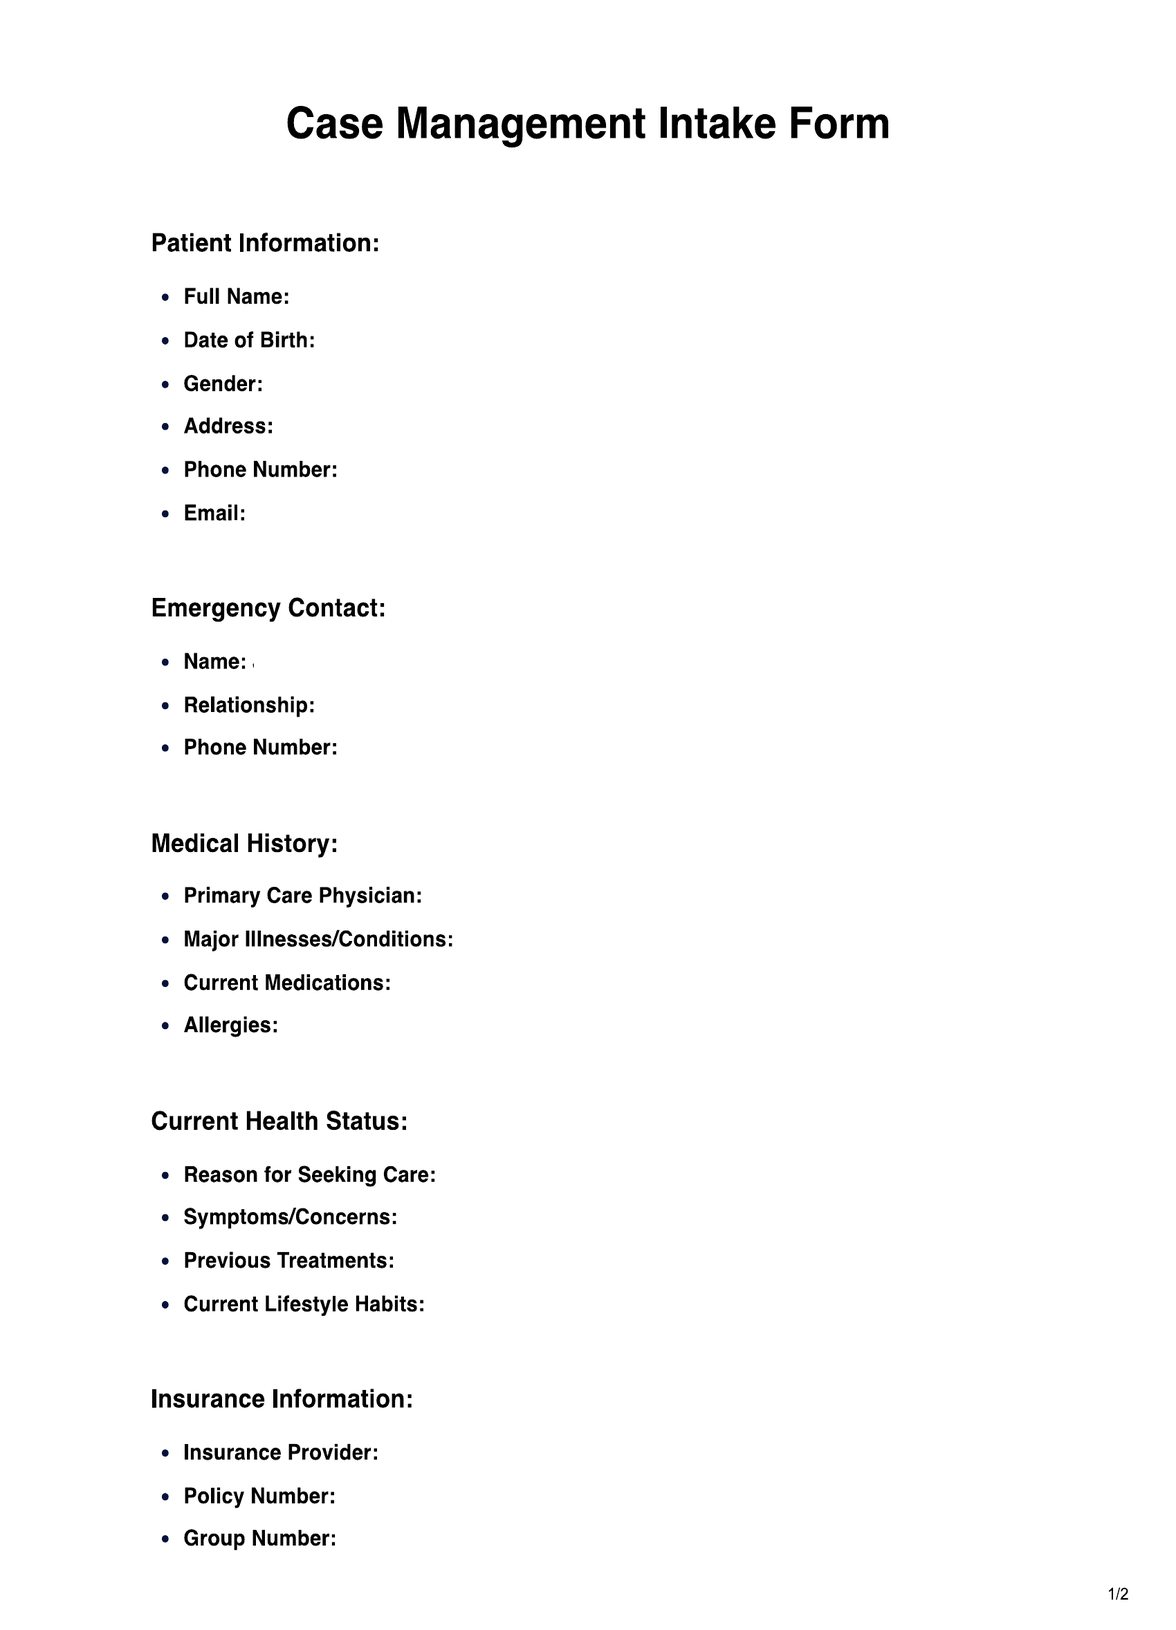 Case Management Intake Form Template PDF Example